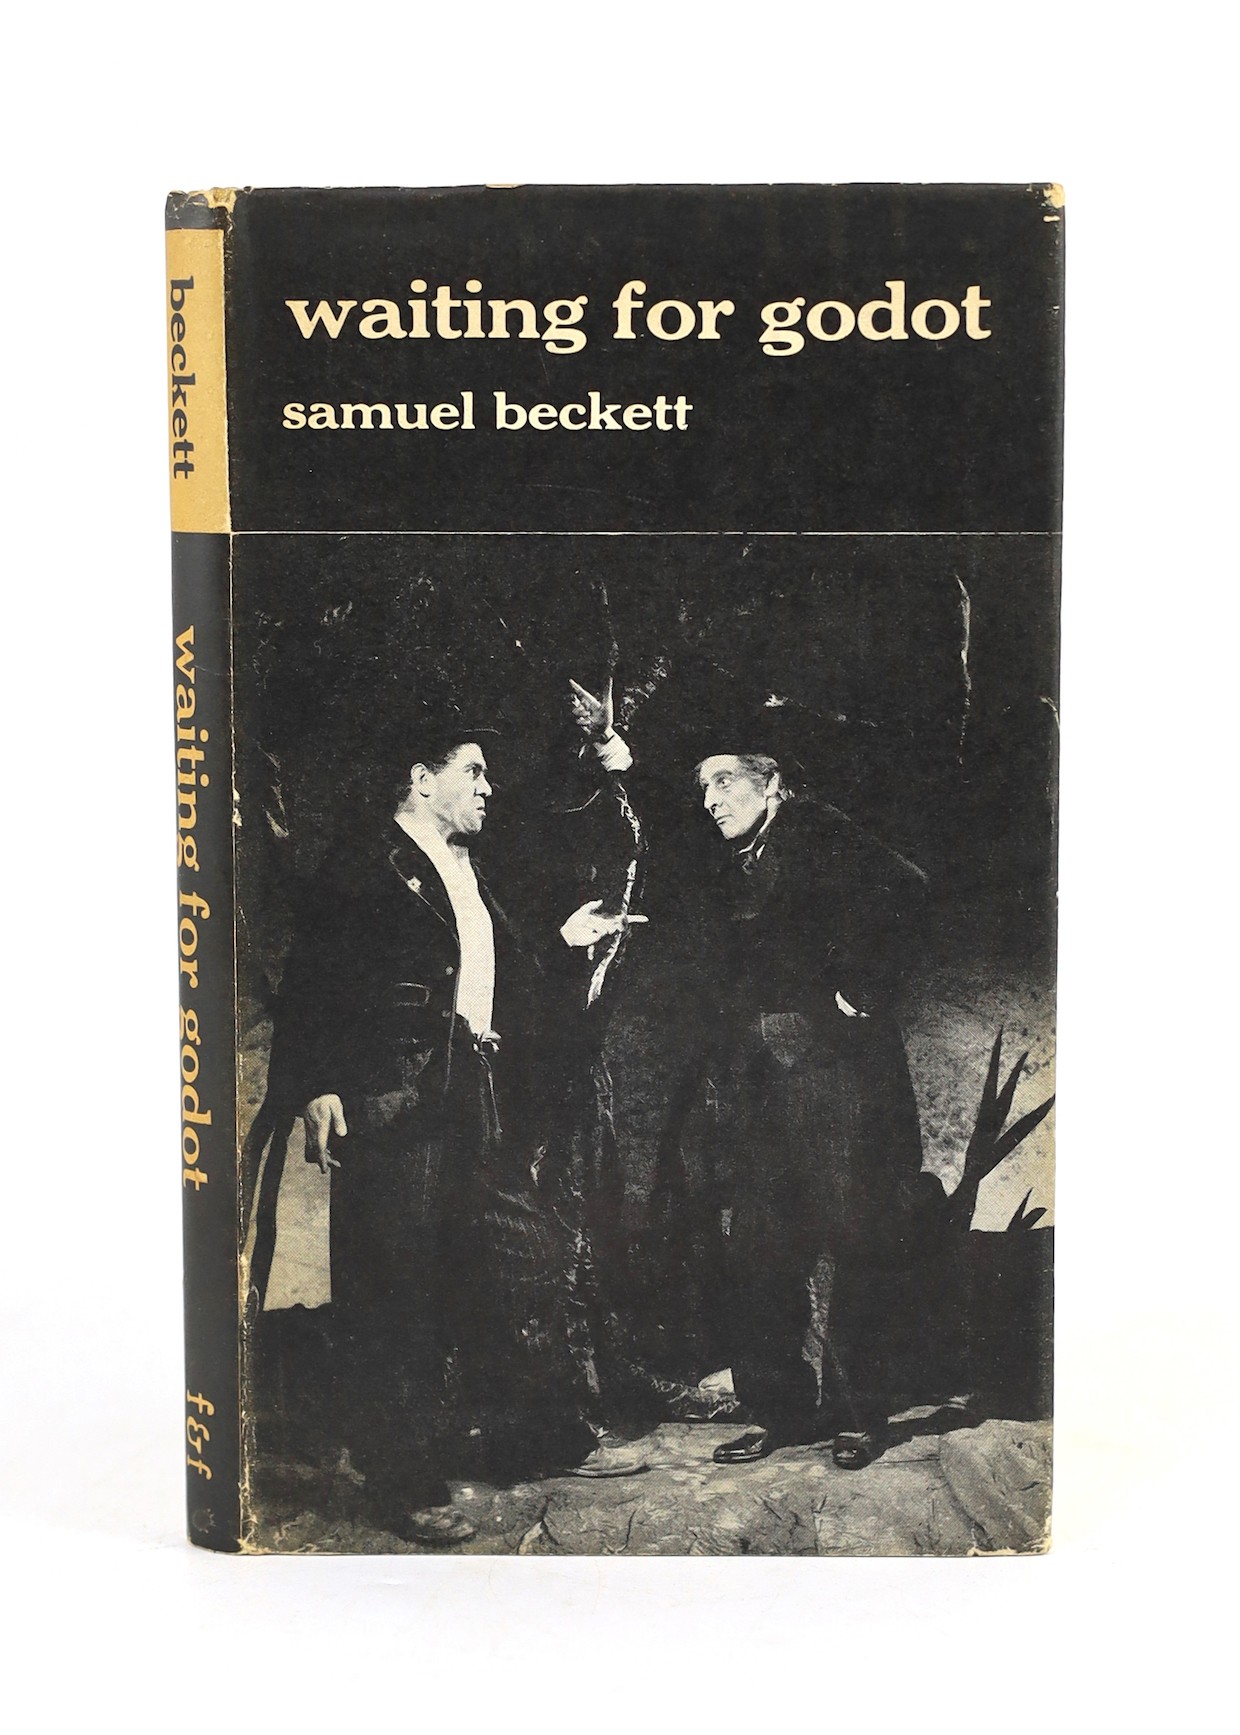 Beckett, Samuel - Waiting for Godot, a Tragicomedy in Two Acts, 1st British edition, 8vo, yellow cloth in unclipped d/j, a review copy, with publishers and review note, Faber and Faber, London, 1956